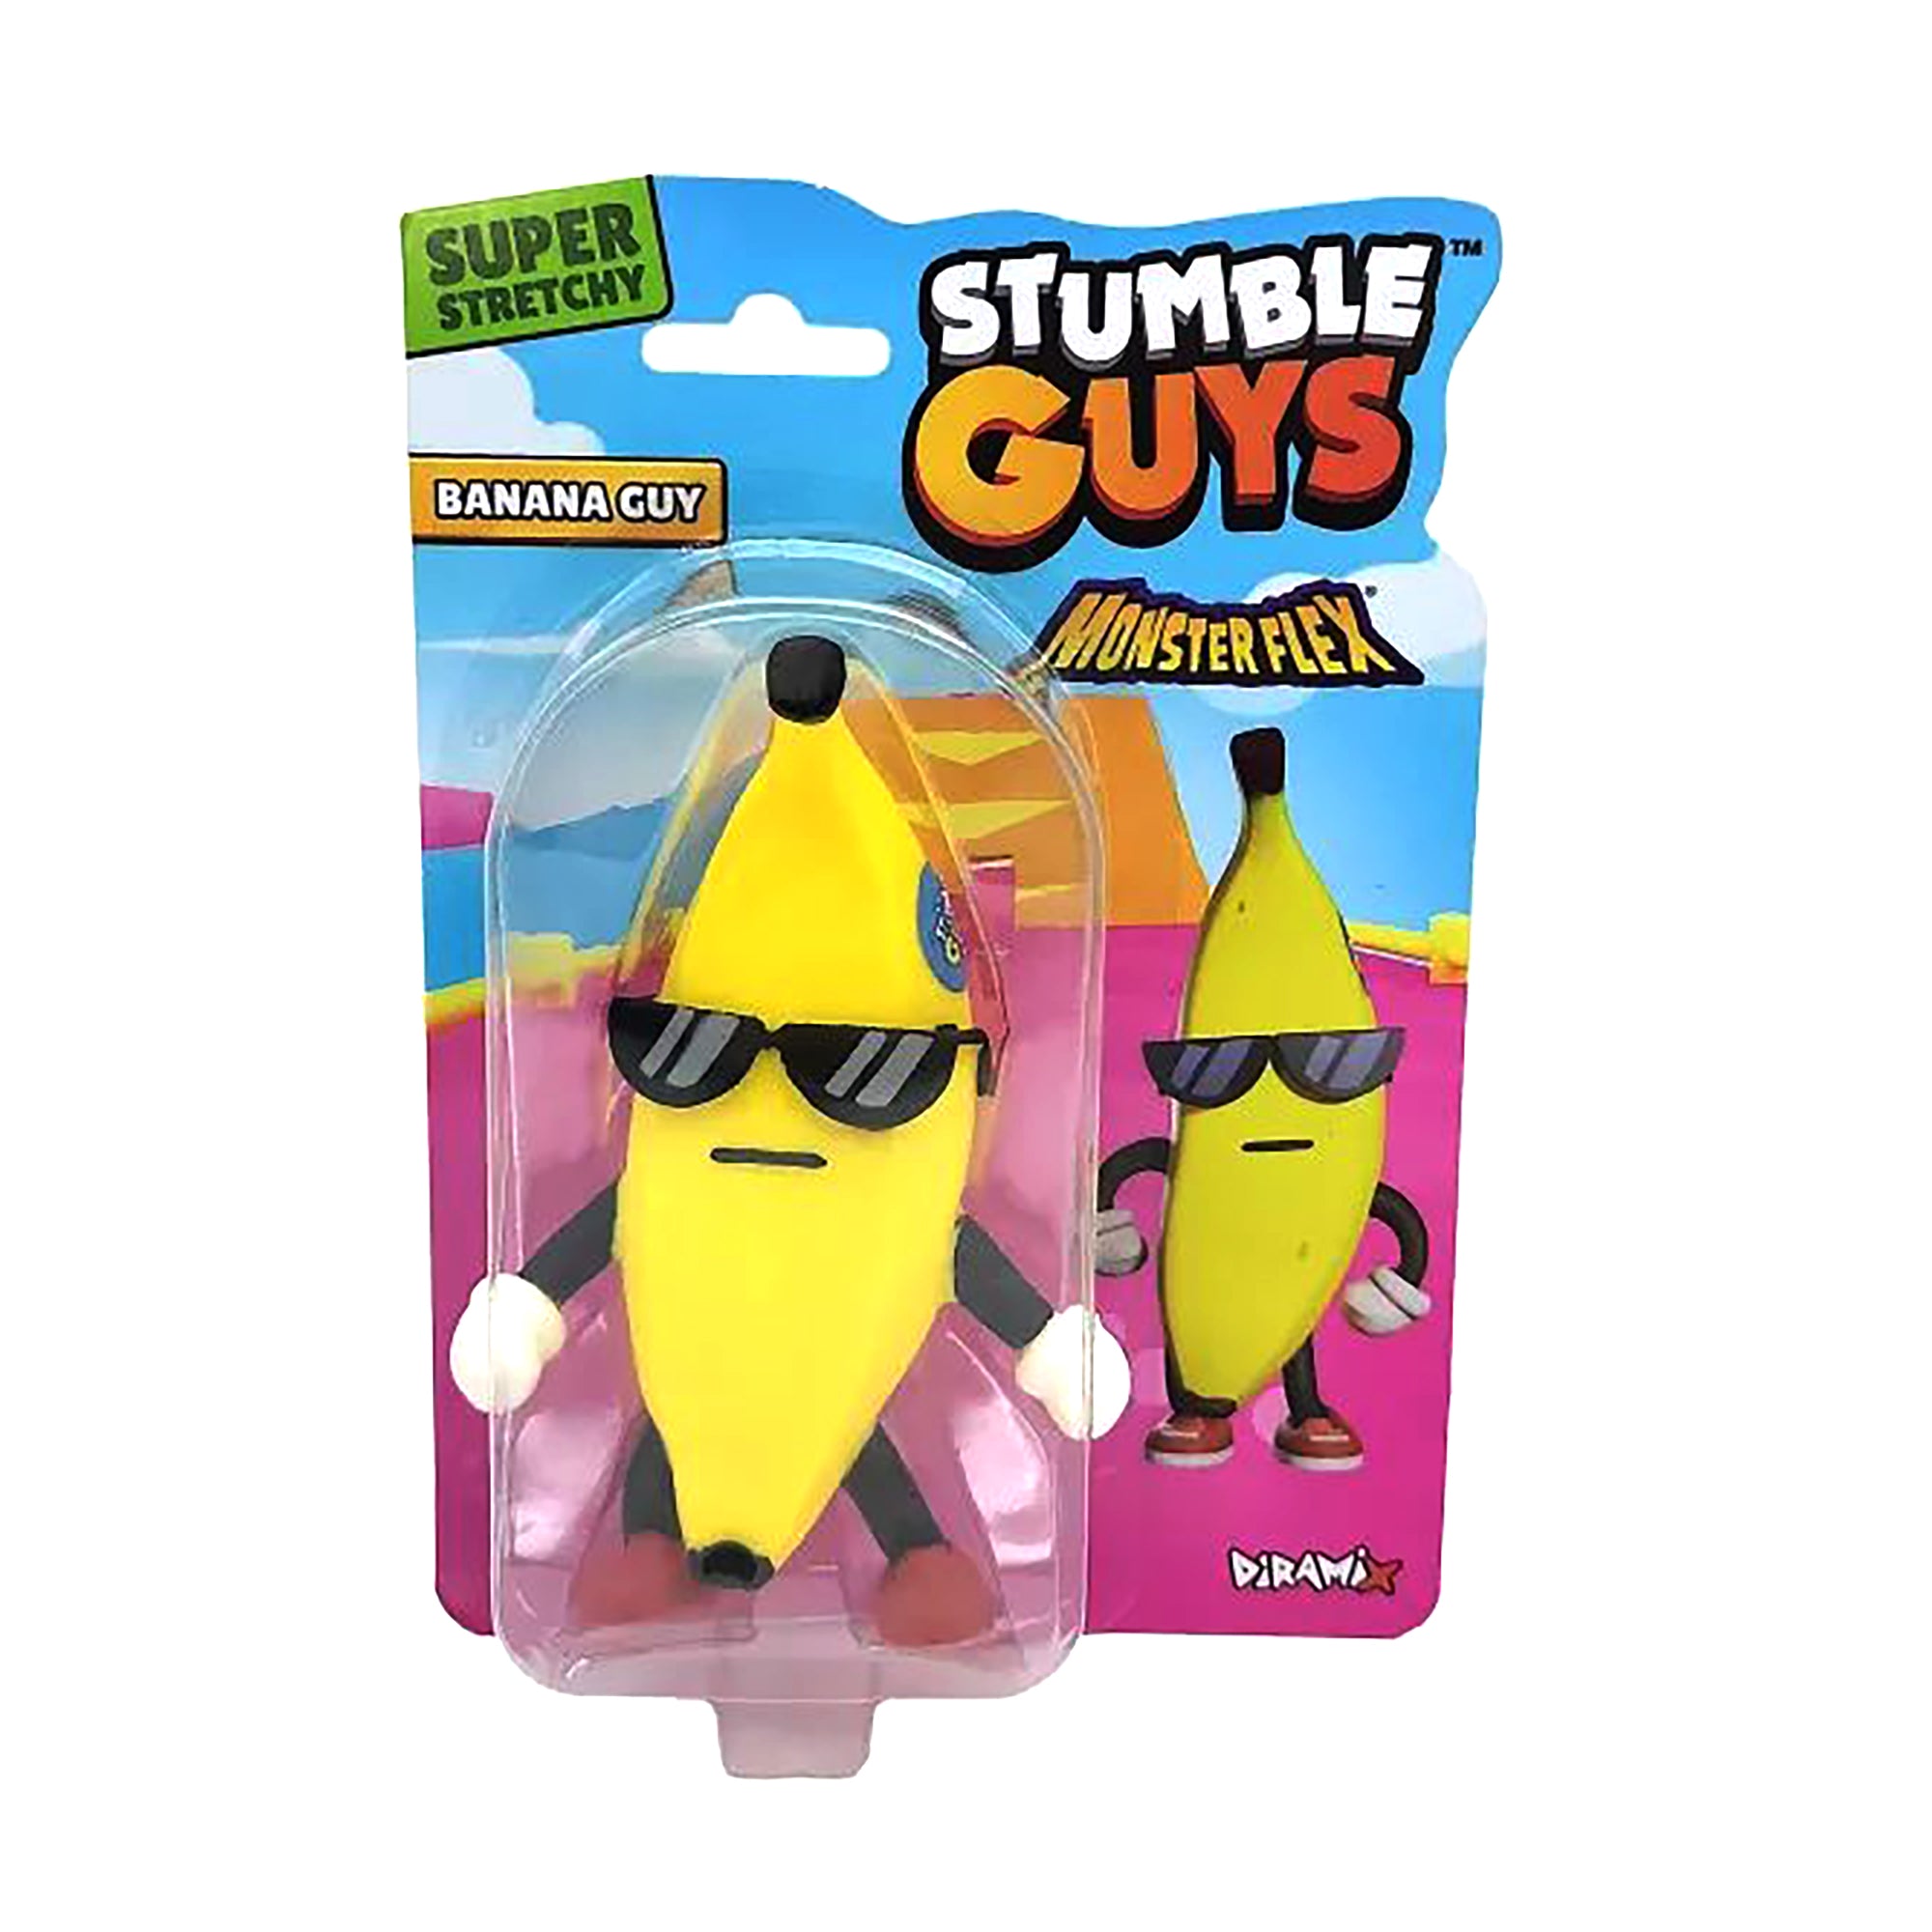 Stumble Guys Monster Flex - Banana Guy - Collectible - Ages 6-Adult - Brown's Hobby & Game